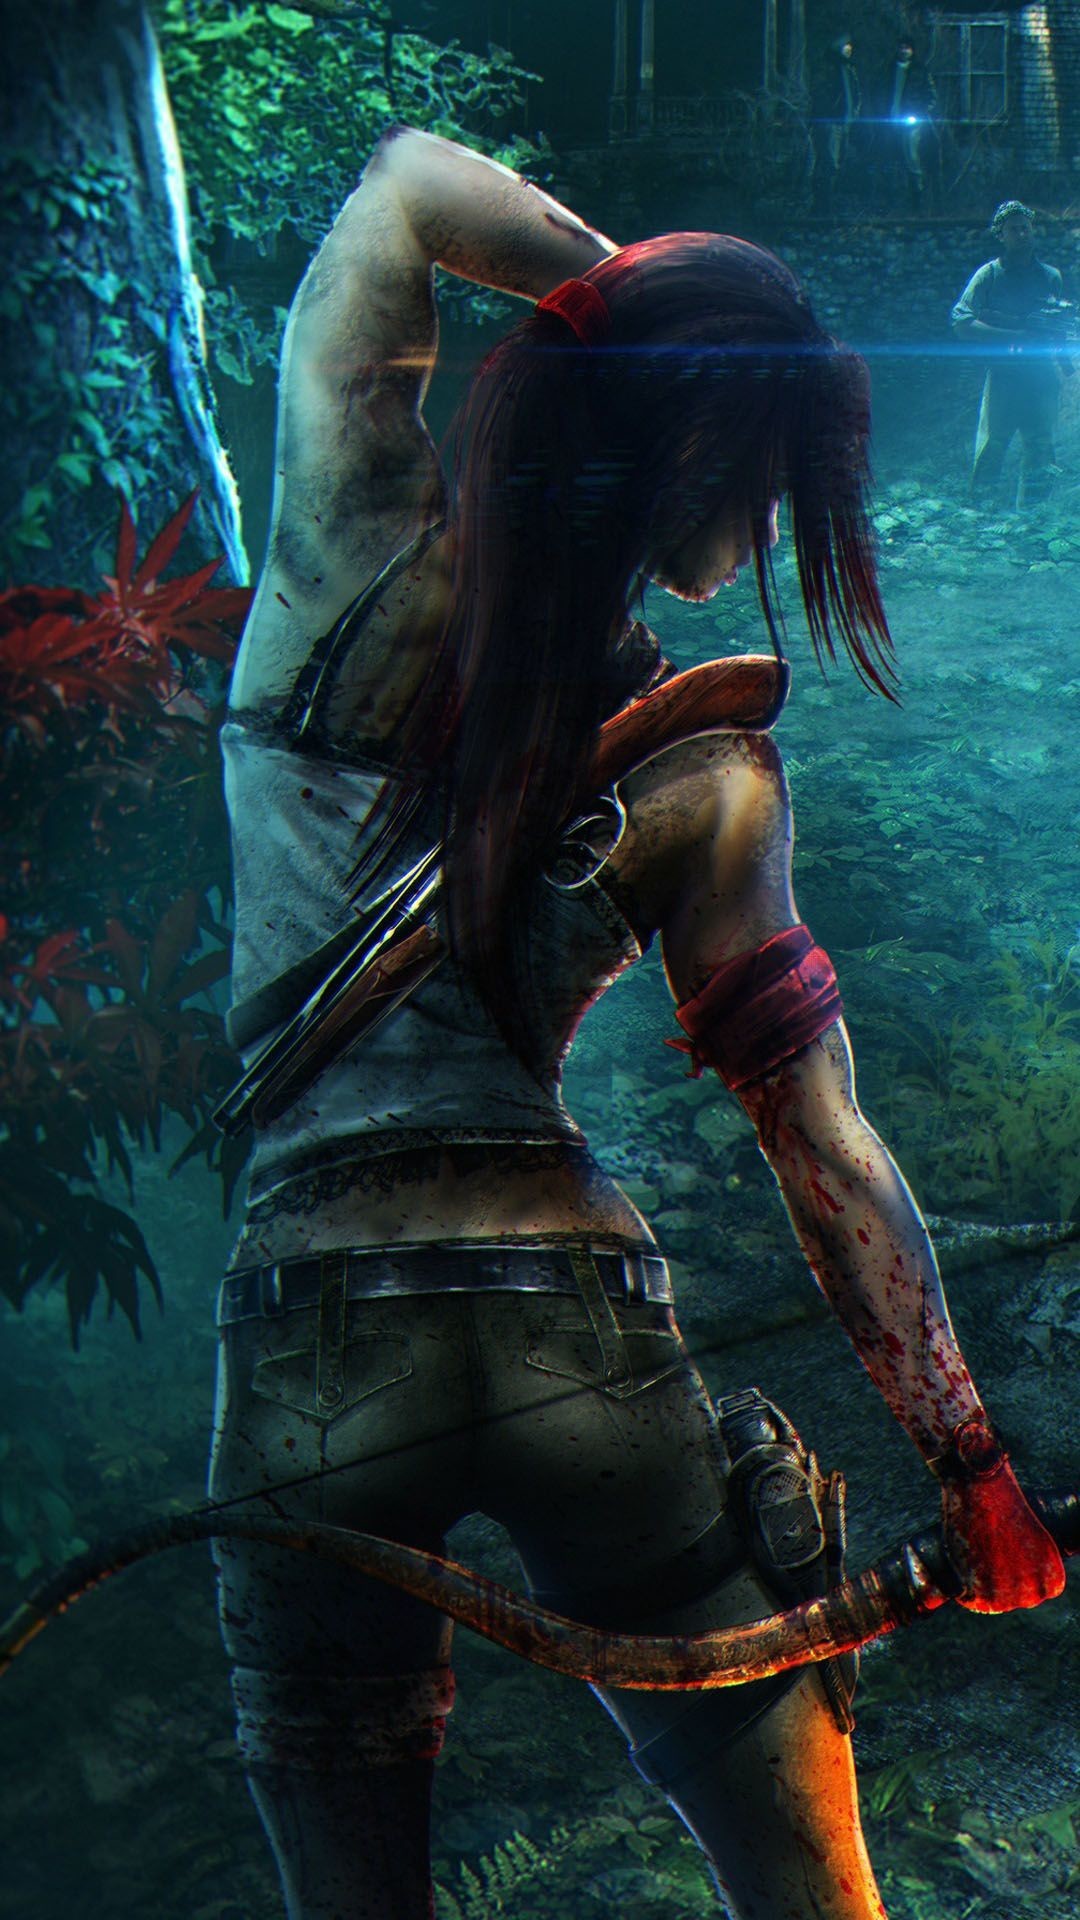 1080x1920 2560x1440 Rise Of The Tomb Raider Wallpapers For Iphone Is Cool Wallpapers